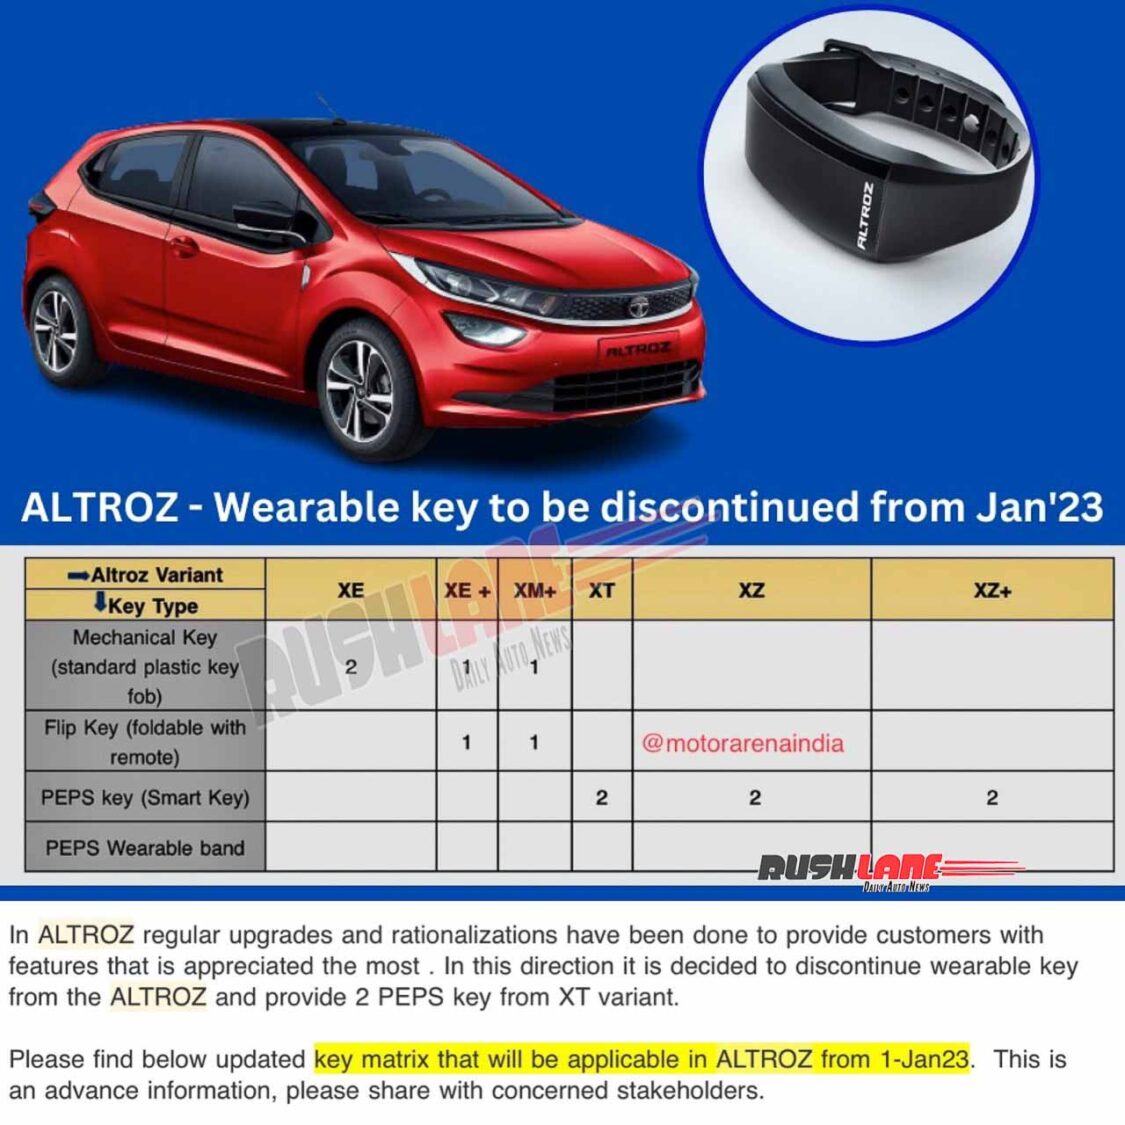 Tata Altroz wearable key discontinued